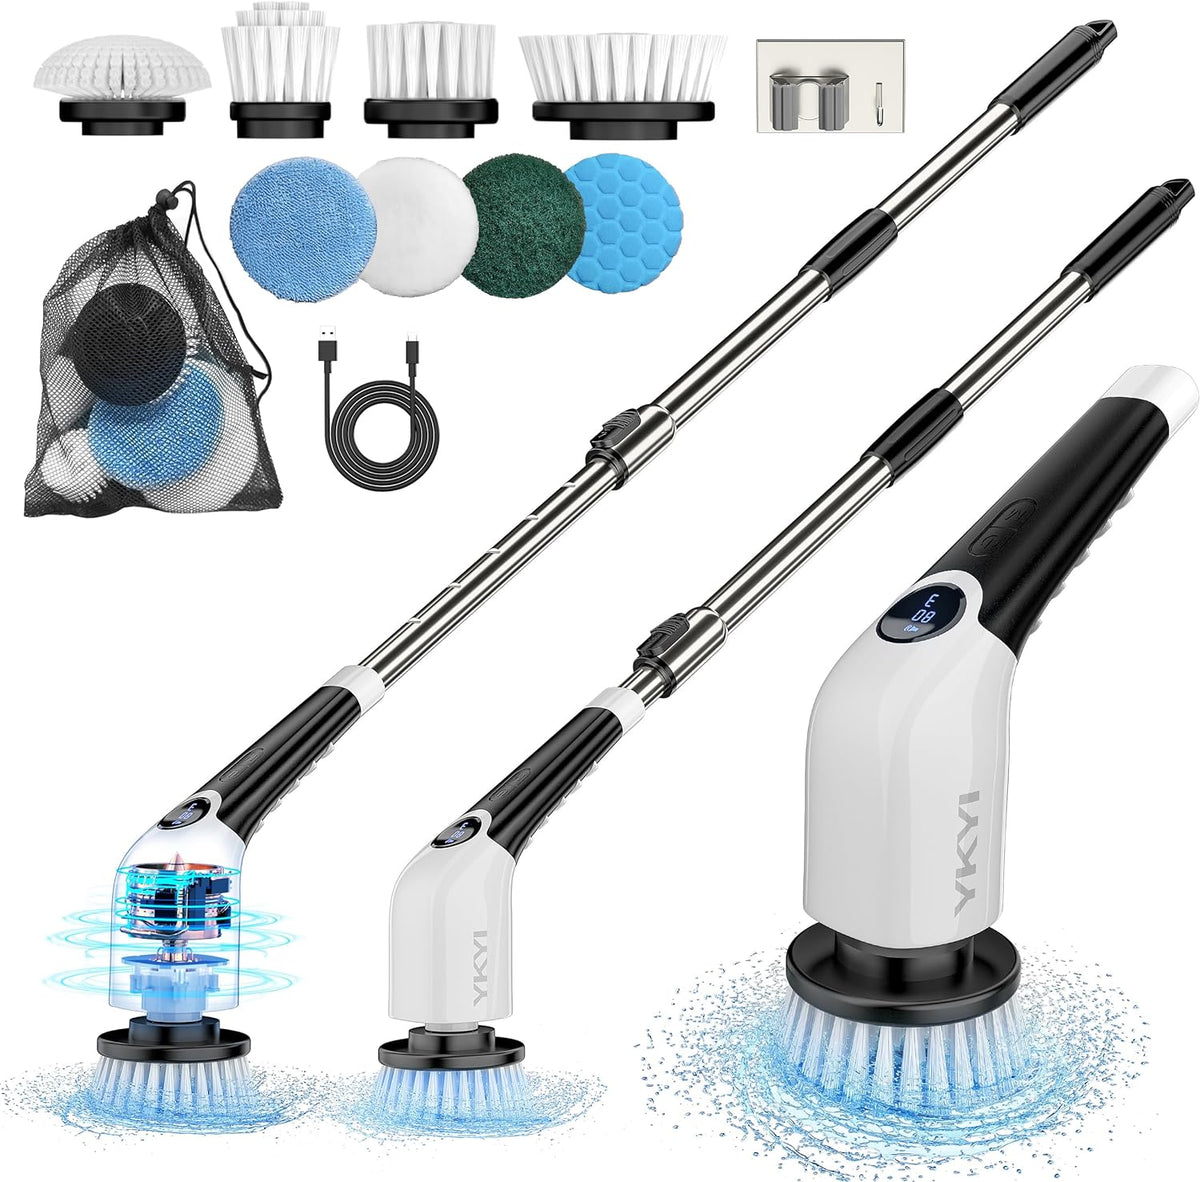 4 Brushes Head Cleaning Brush Electric Spin Scrubber for Bathroom